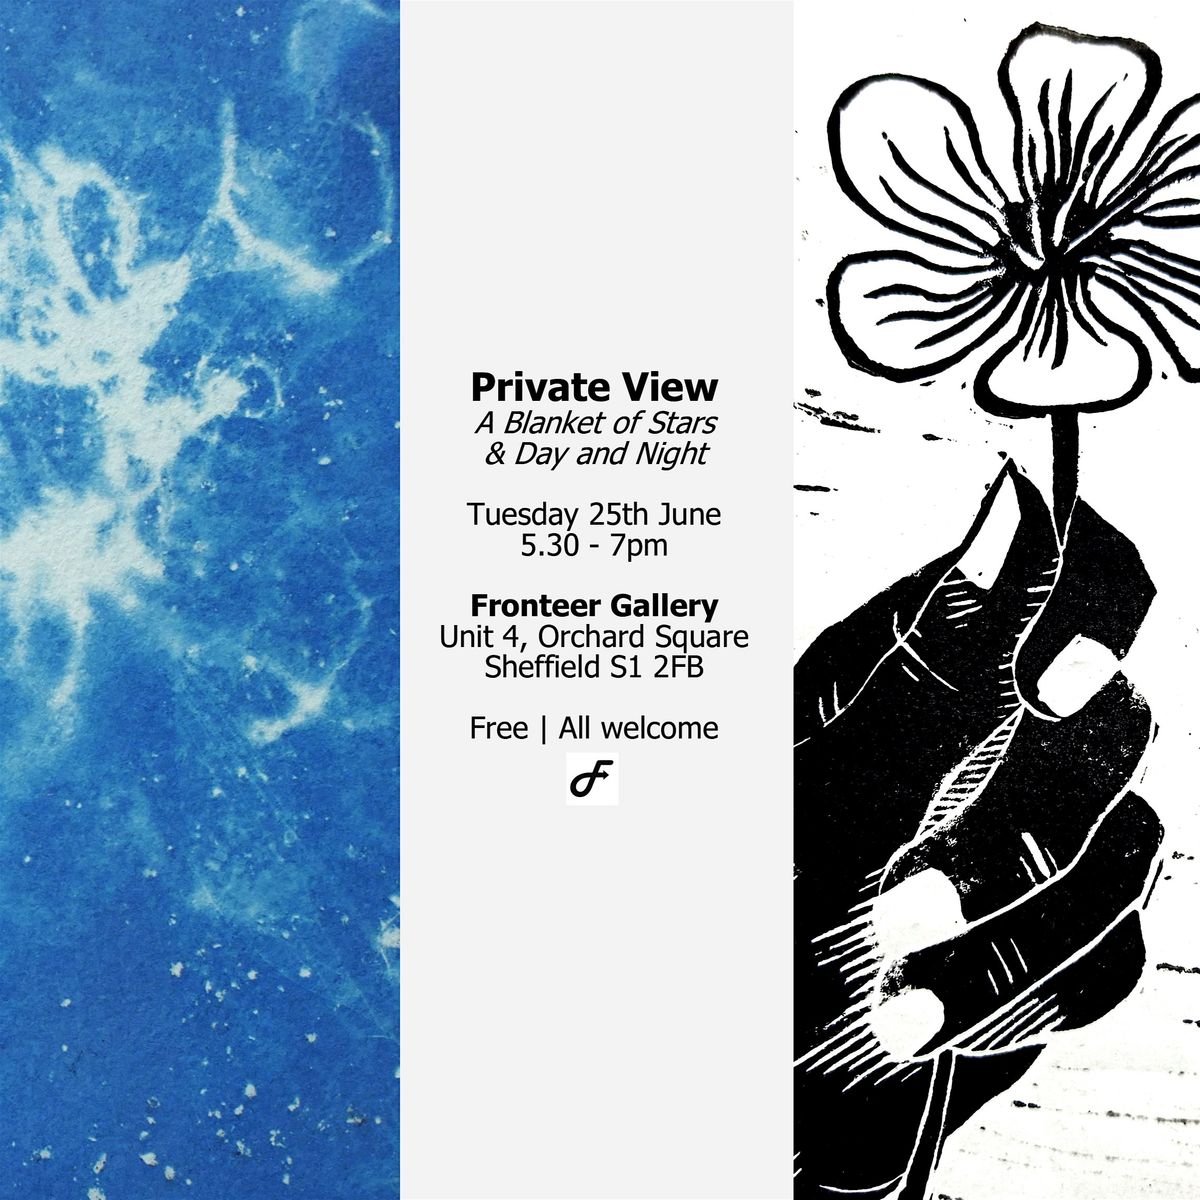 Private View - 'A Blanket of Stars' and 'Day and Night'